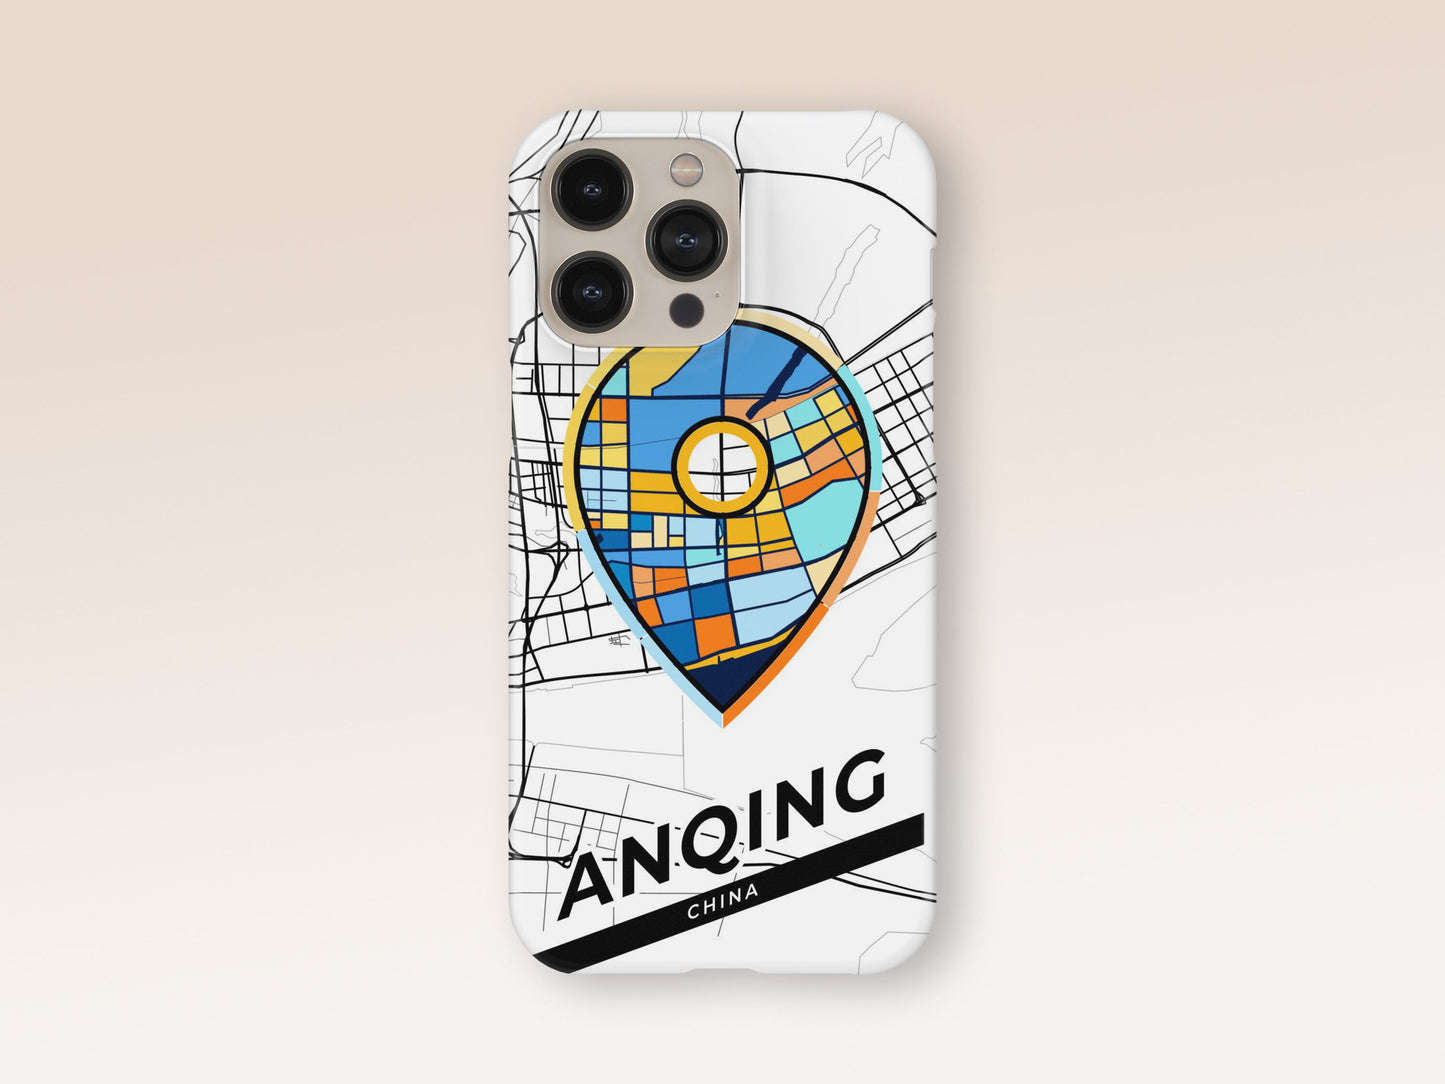 Anqing China slim phone case with colorful icon. Birthday, wedding or housewarming gift. Couple match cases. 1